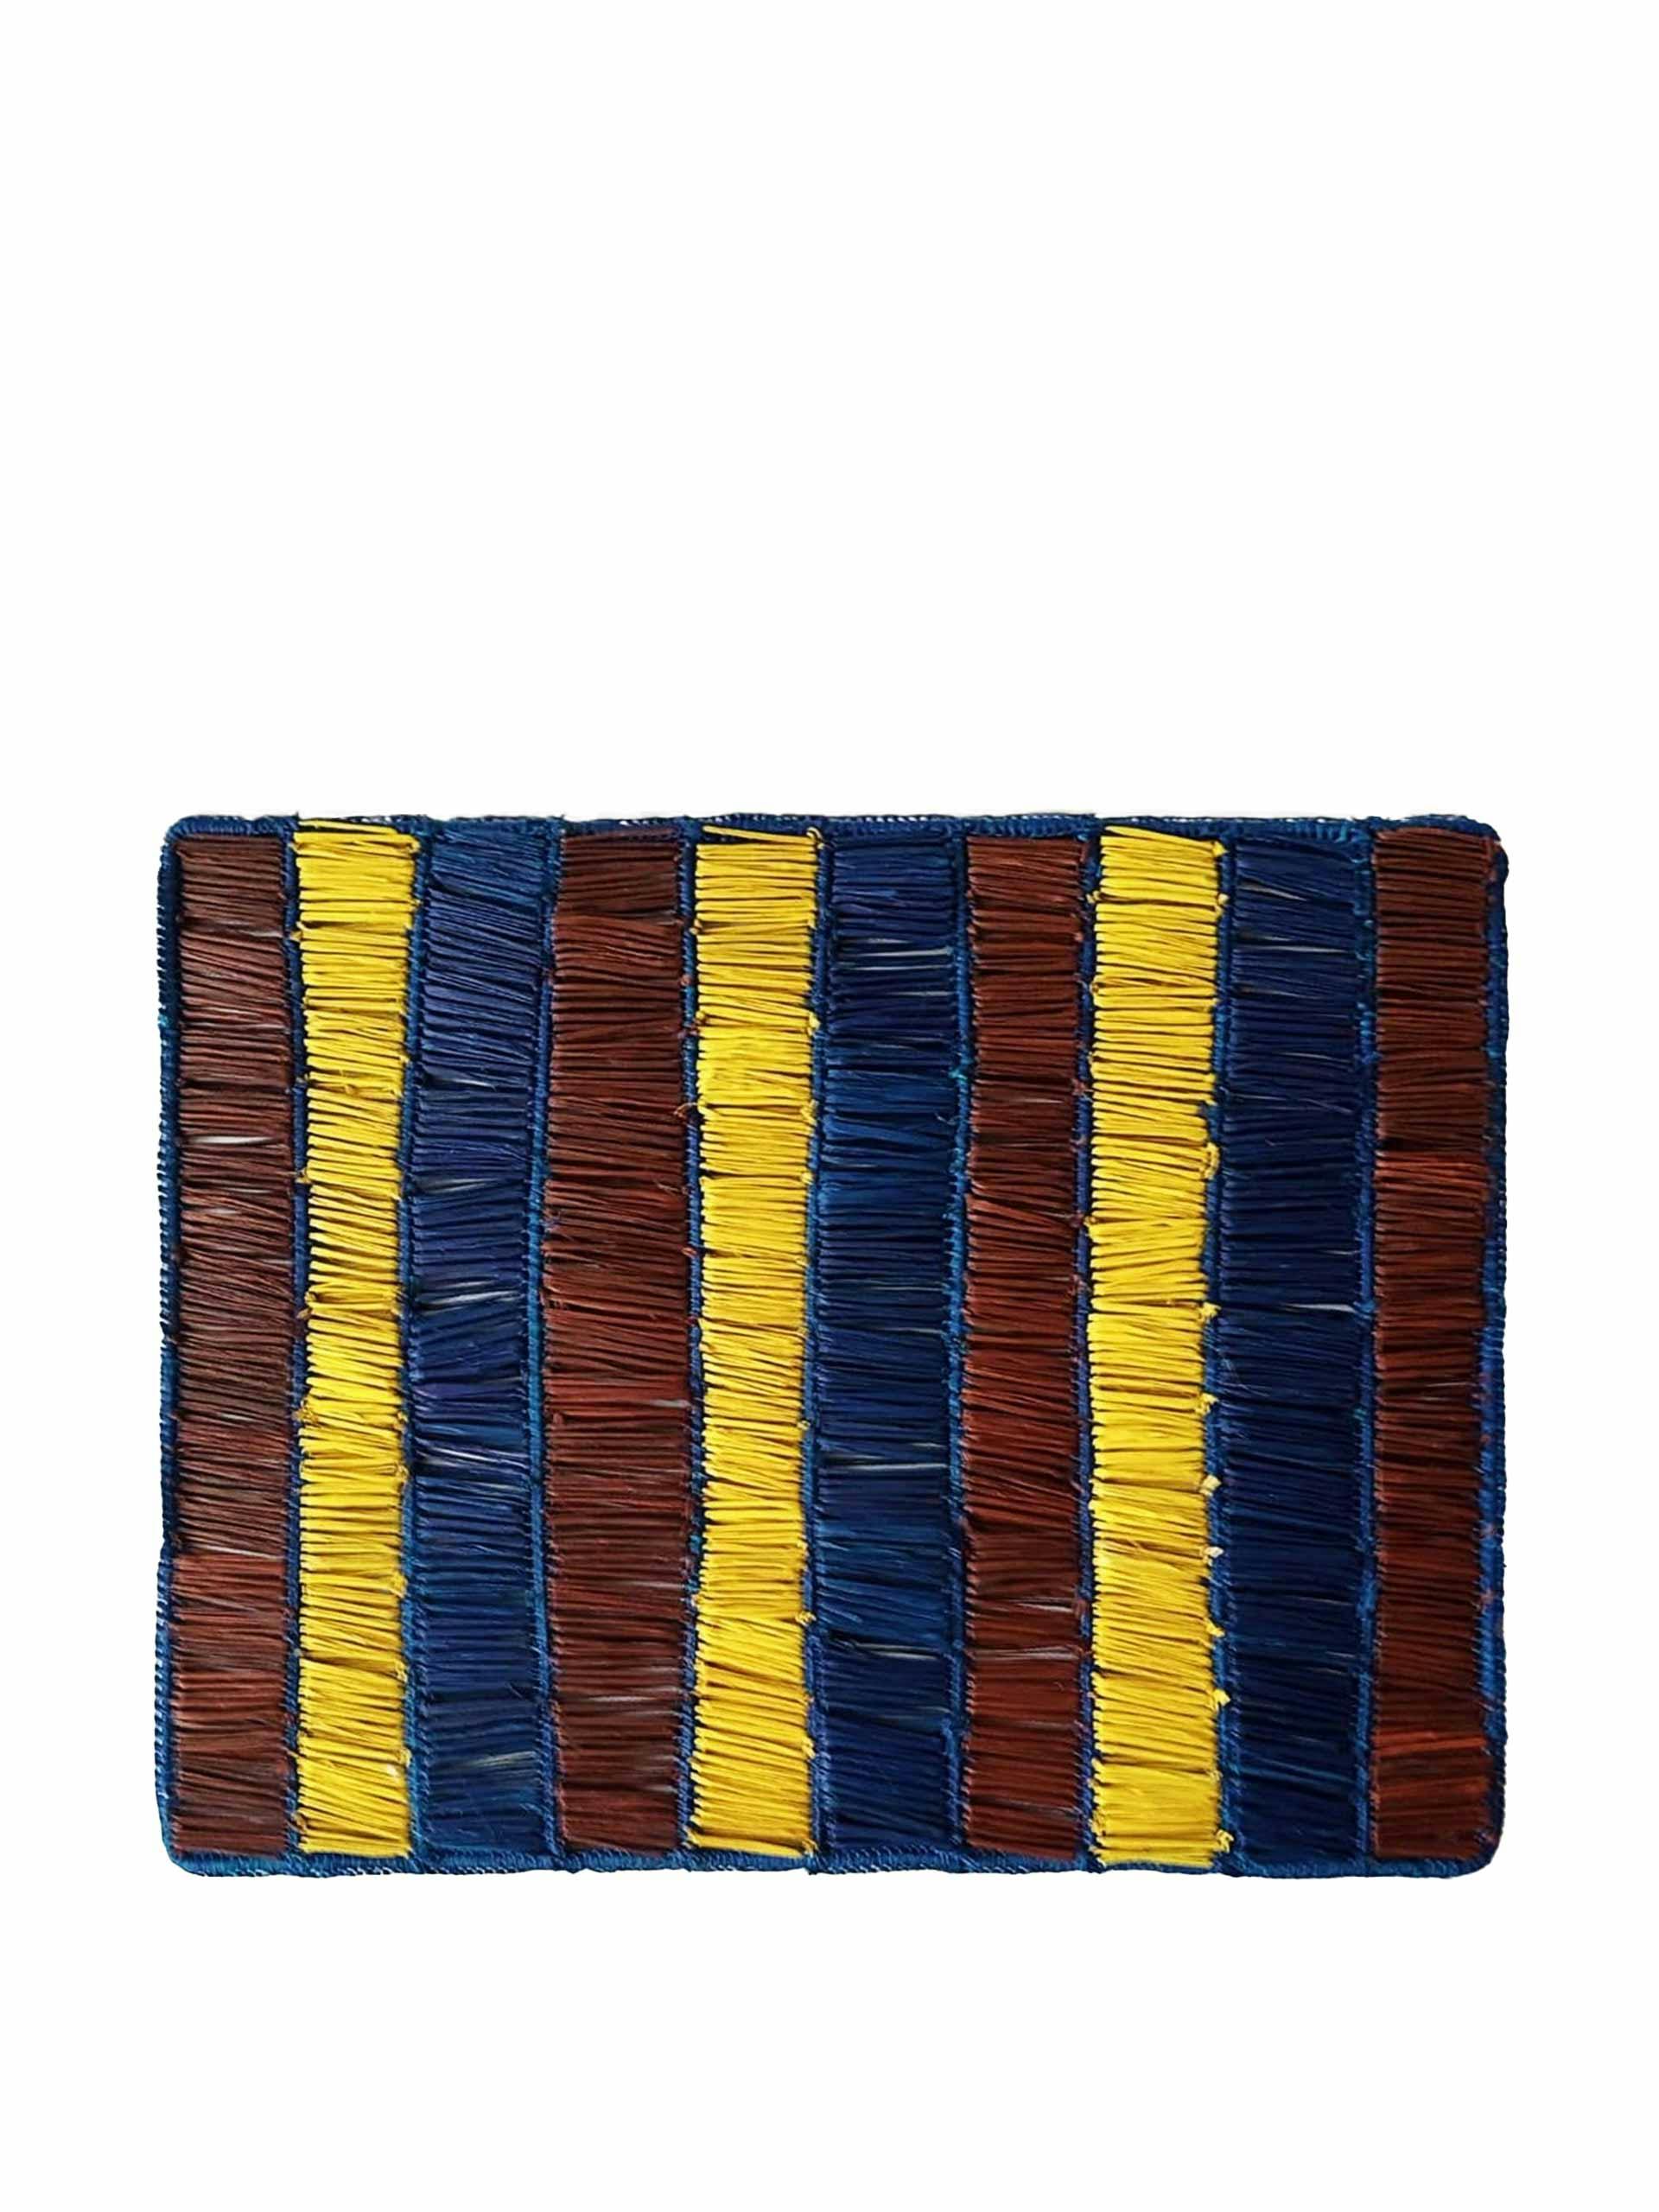 Collagerie x The Colombia Collective Raya woven placemats, set of 2